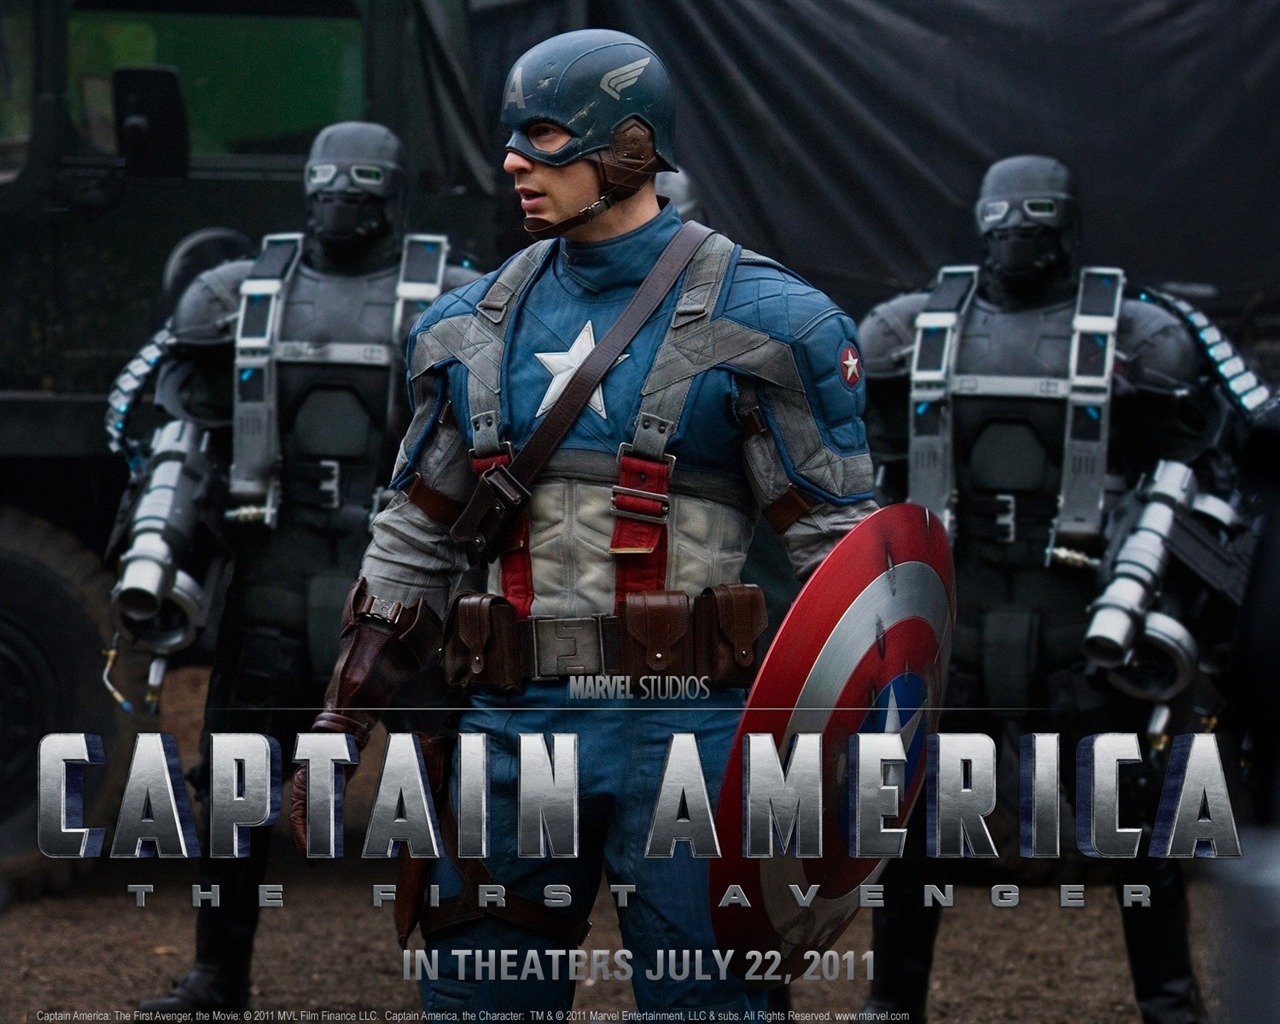 Captain America: The First Avenger wallpapers HD #21 - 1280x1024